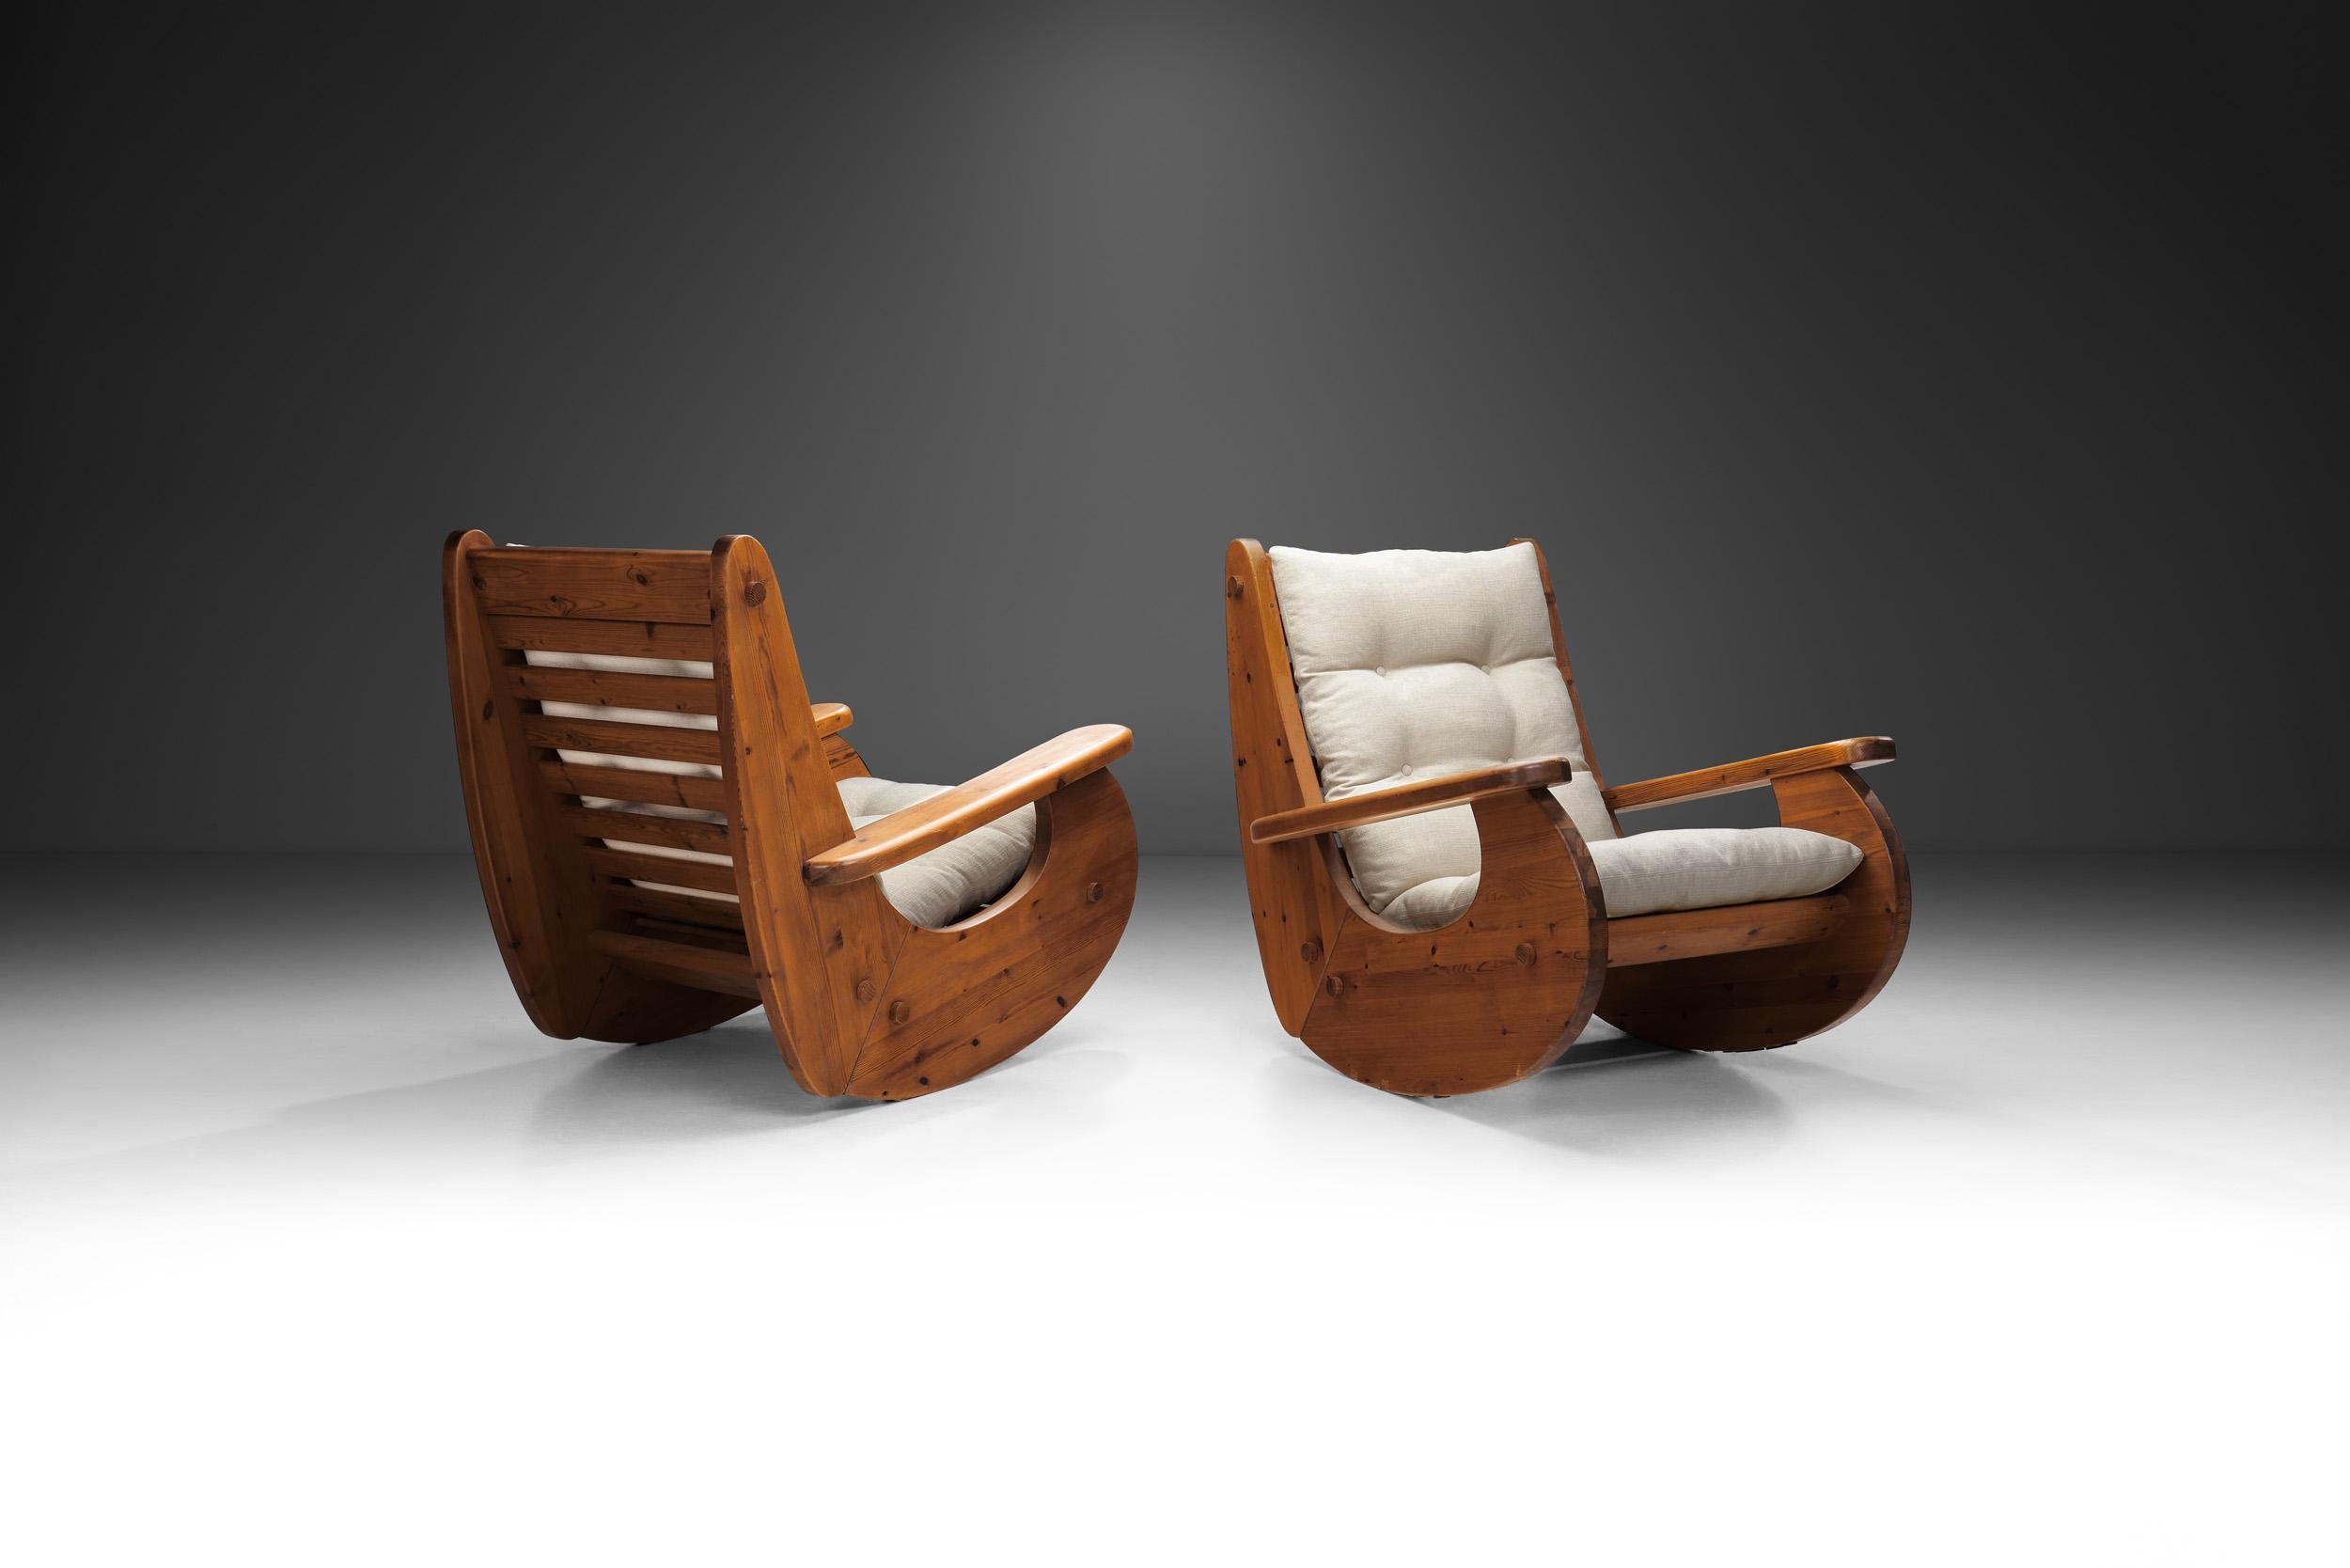 Brutalist Large Pine Wood Rocking Chairs, The Netherlands 1970s